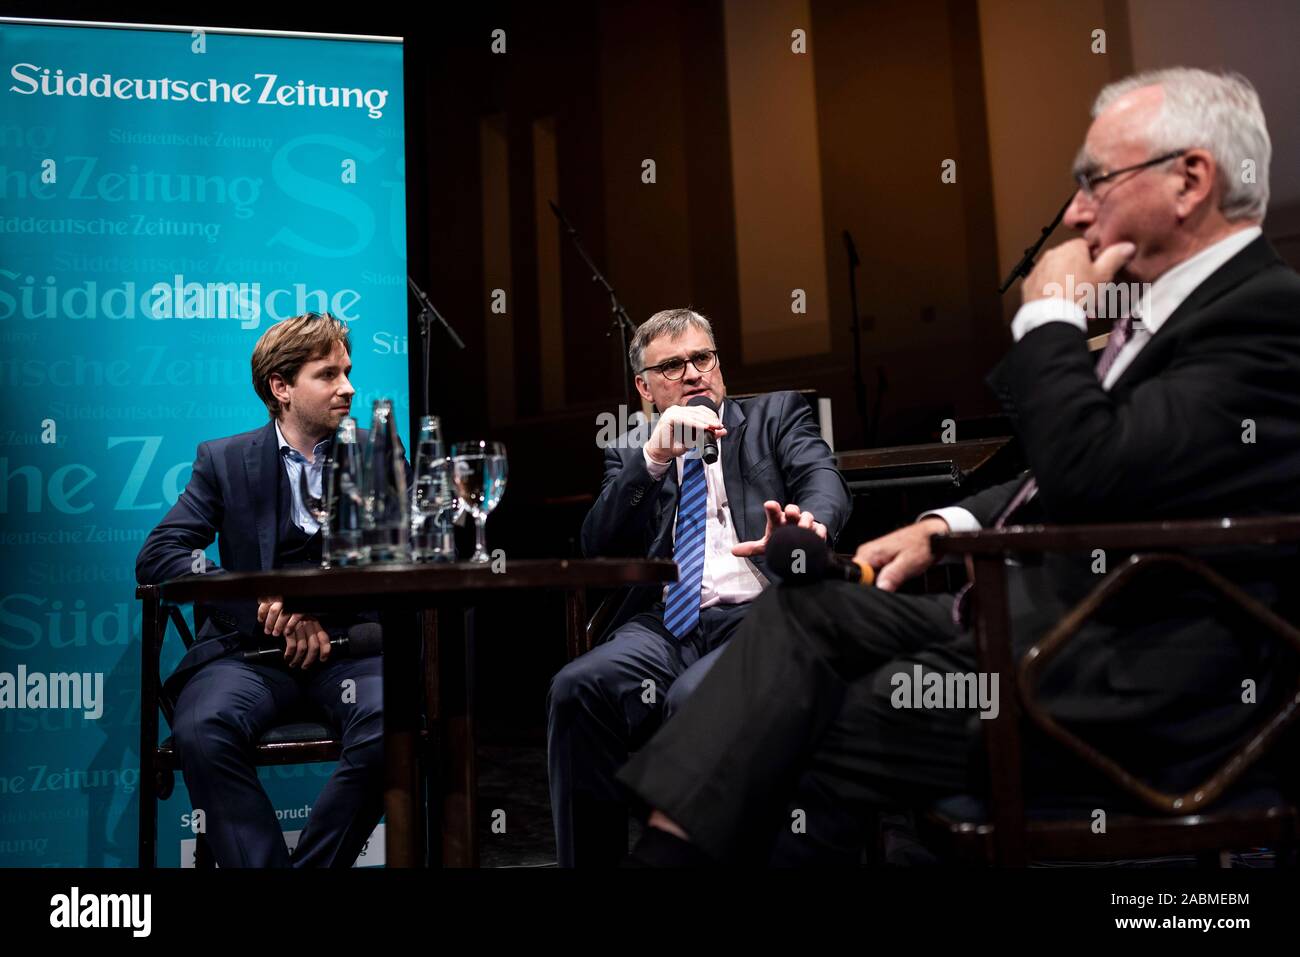 At the beginning of the series 'Wärme und Wallung' of the 'Süddeutsche Zeitung' and the Münchner Kammerorchester Clemens Schuldt, director of the MKO, SZ journalist Stefan Kornelius and Theo Waigel (CSU) discuss Germany 30 years after reunification in the Munich Prinzregententheater. [automated translation] Stock Photo